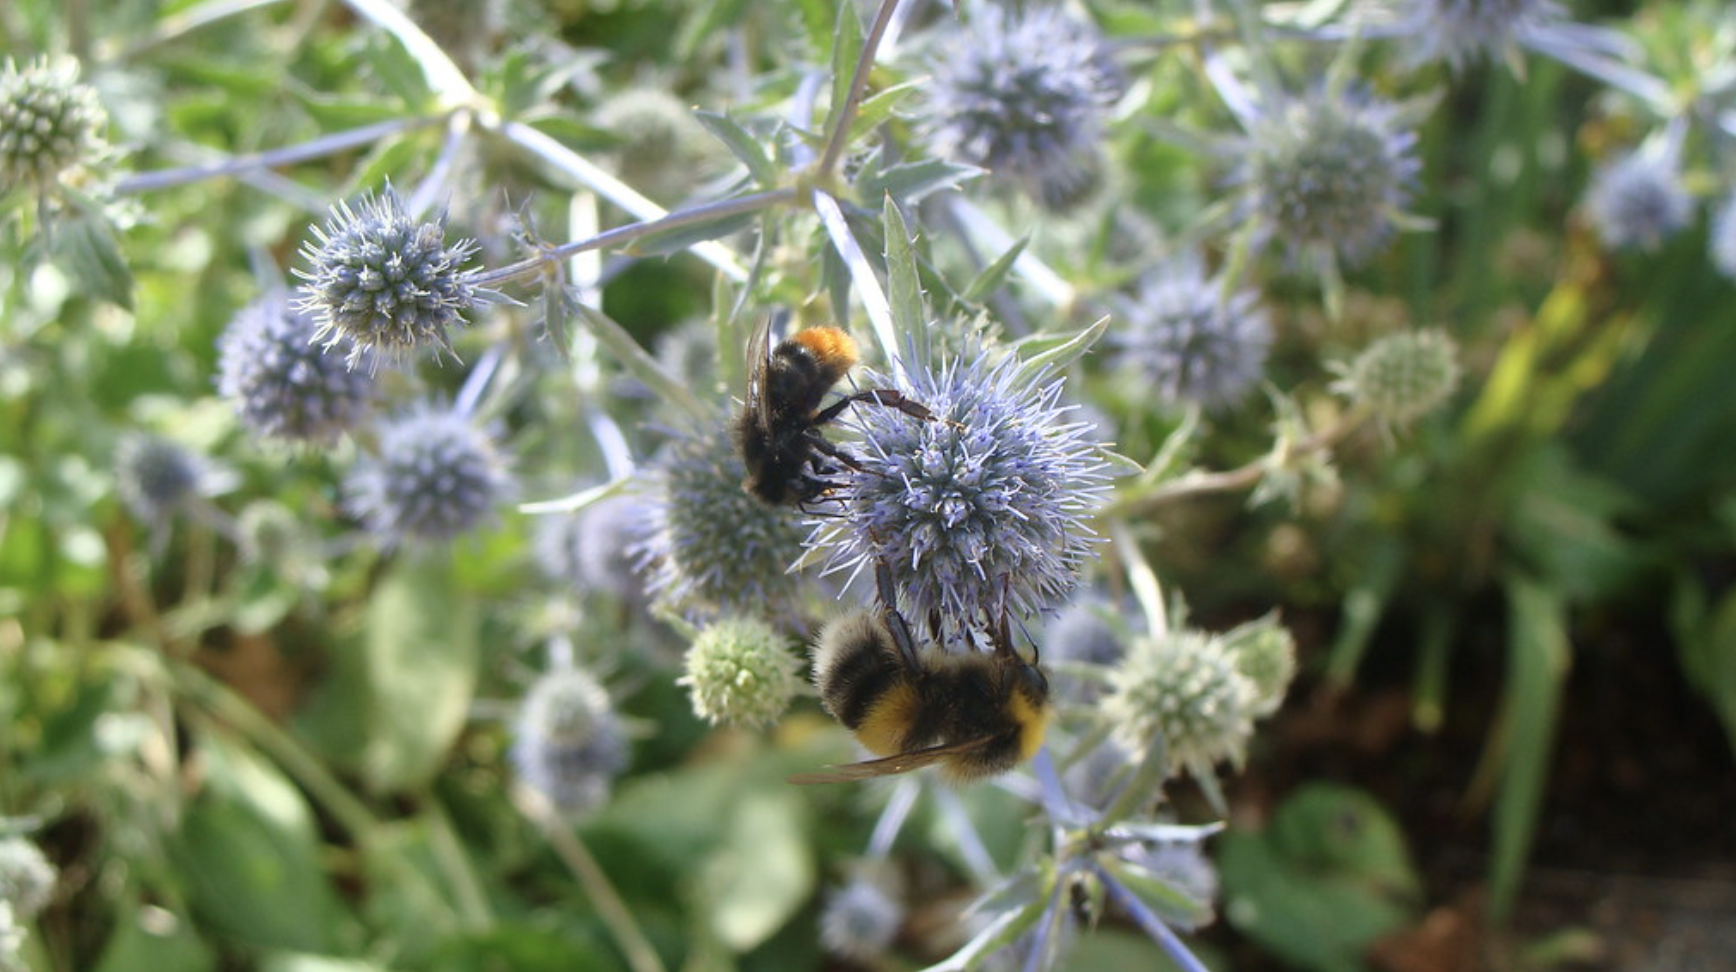 Bumblebees pollinate a garden in London, England, July 16, 2009 (Photo by nikoretro) Creative Commons license via Flickr